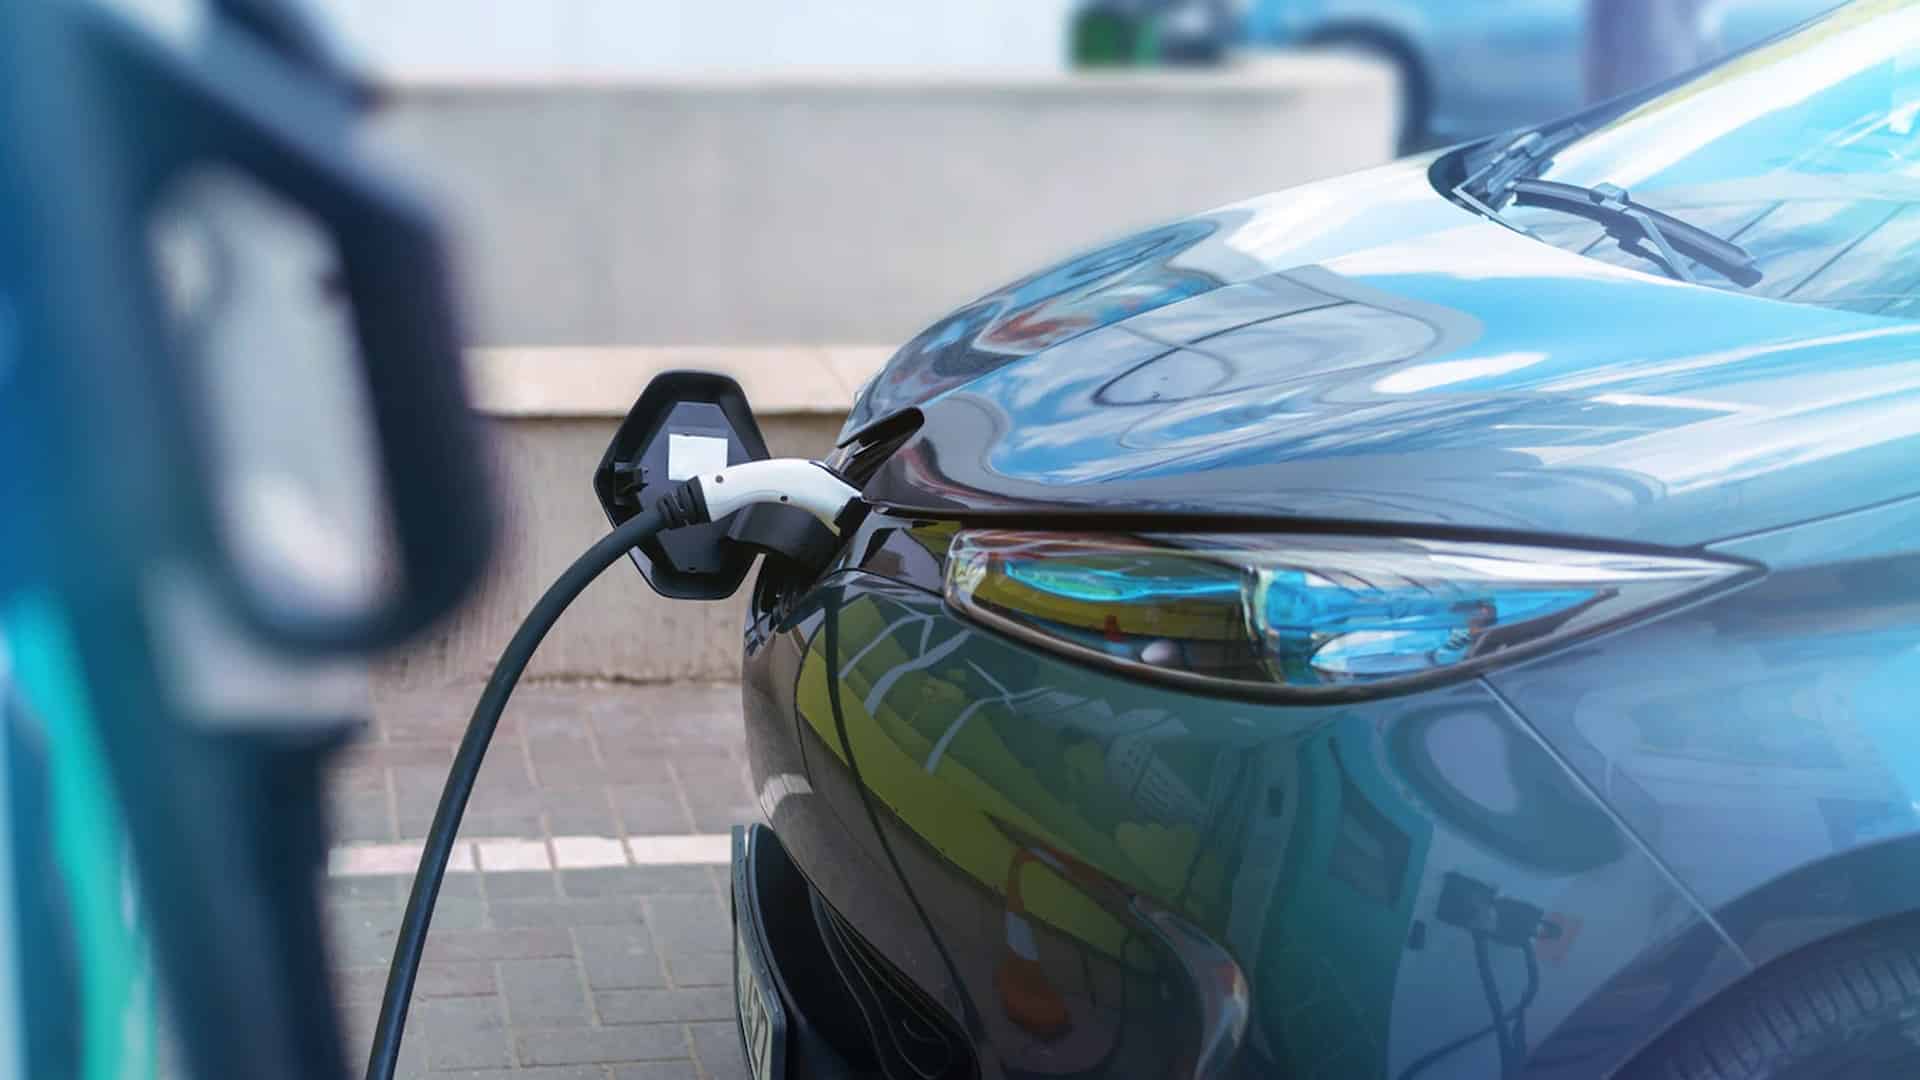 India has the potential to become a world leader in production of electric vehicles: Berkeley Research